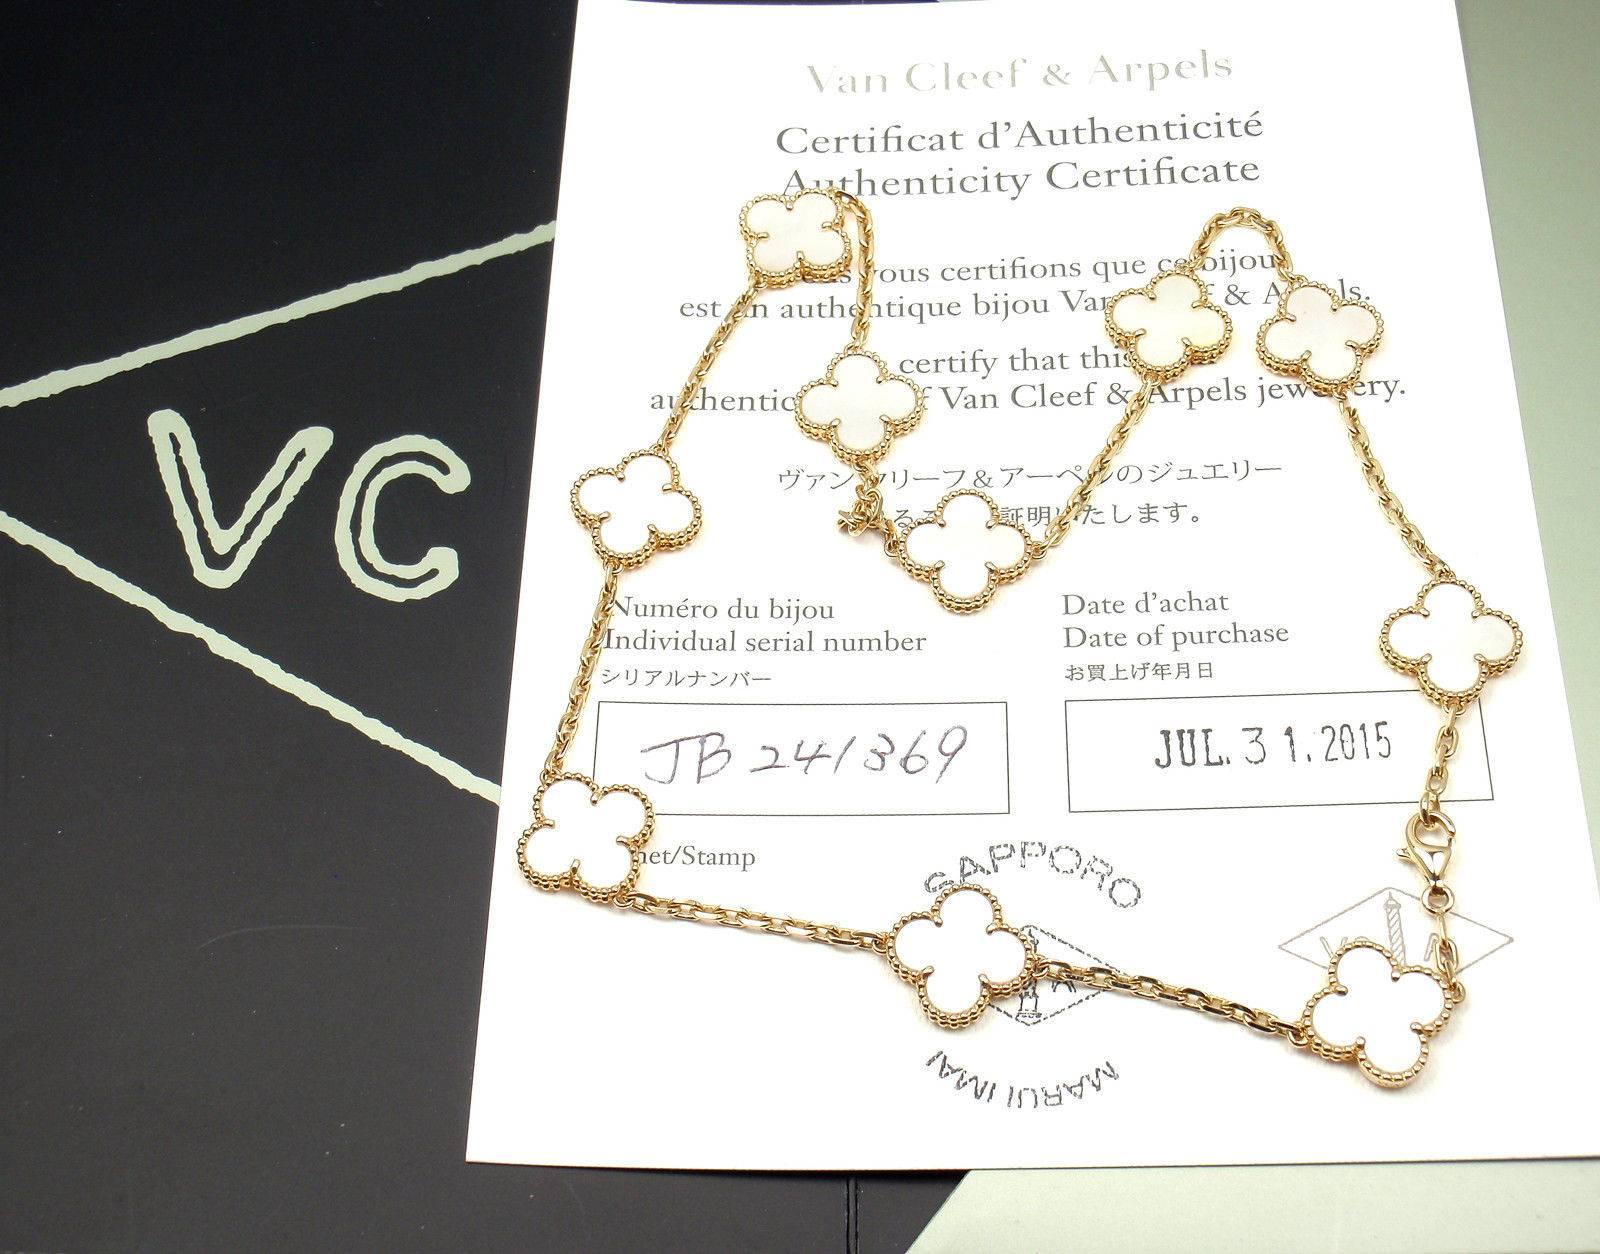 18k Yellow Gold Alhambra 10 Motifs Mother Of Pearl Necklace by Van Cleef & Arpels. 
With 10 motifs of mother of pearl Alhambra stones 15mm each 
This necklace comes with Van Cleef & Arpels certificate. 
Details: 
Length: 16.5